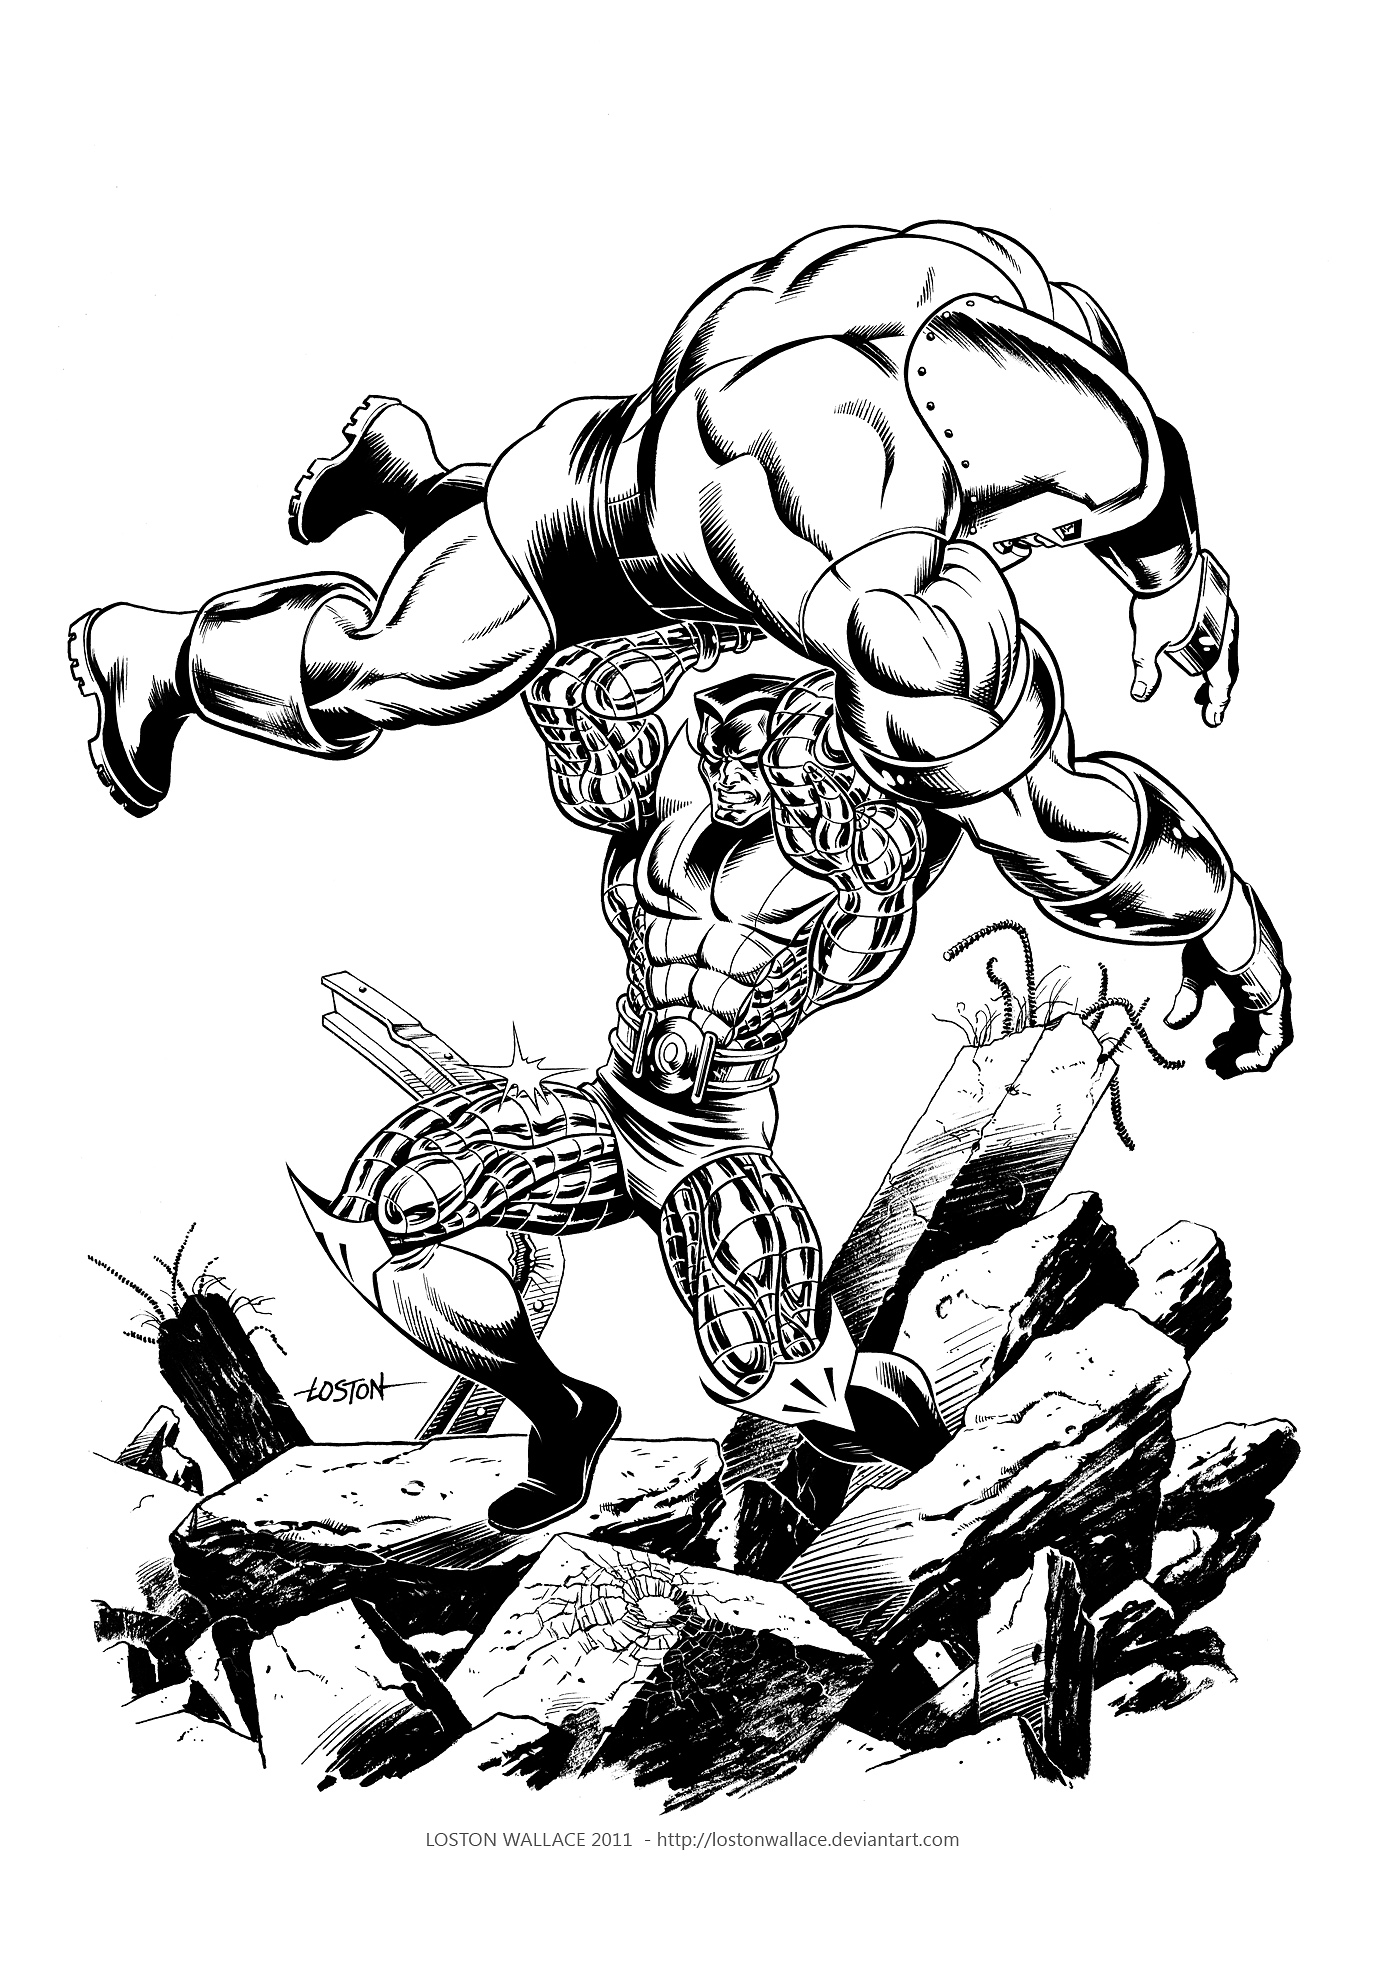 Colossus Commission